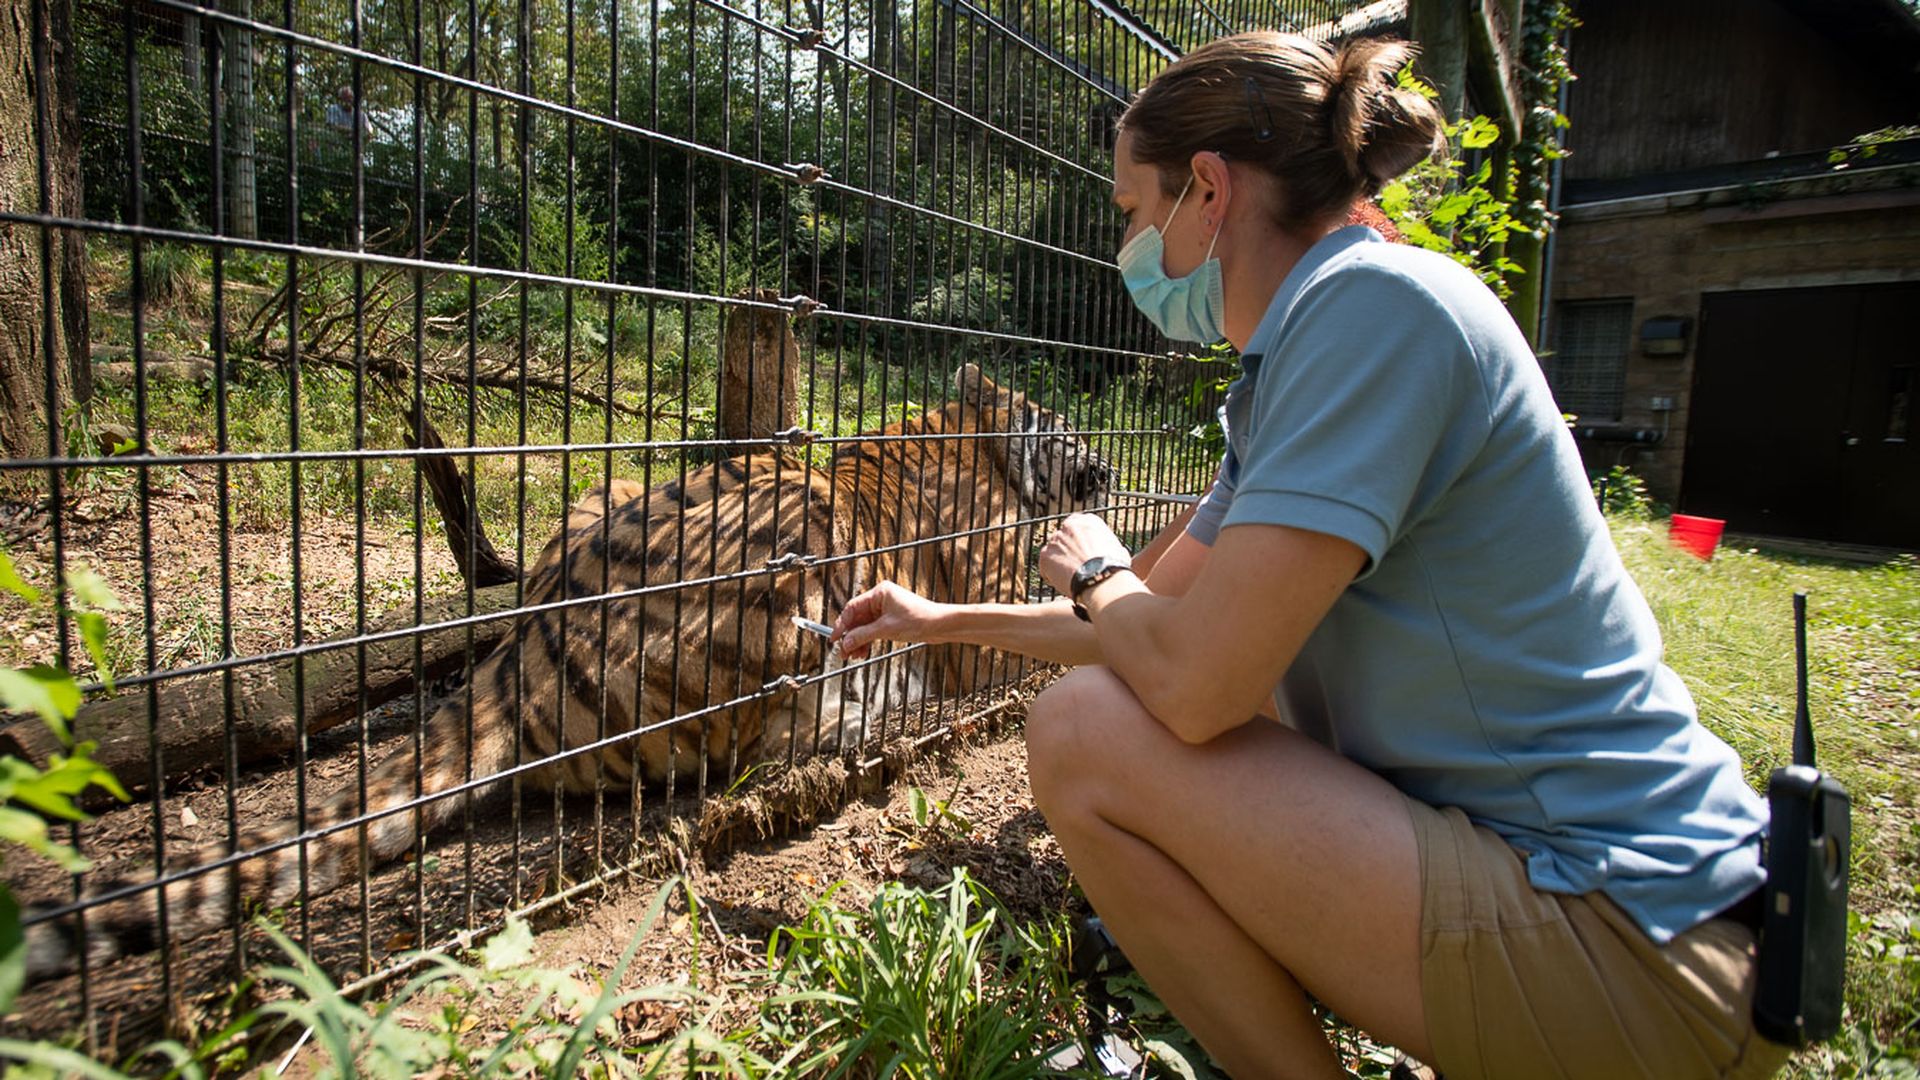 A Columbus Zoo employee administers a COVID vaccine to a tiger that is sitting against an exhibit fence between them